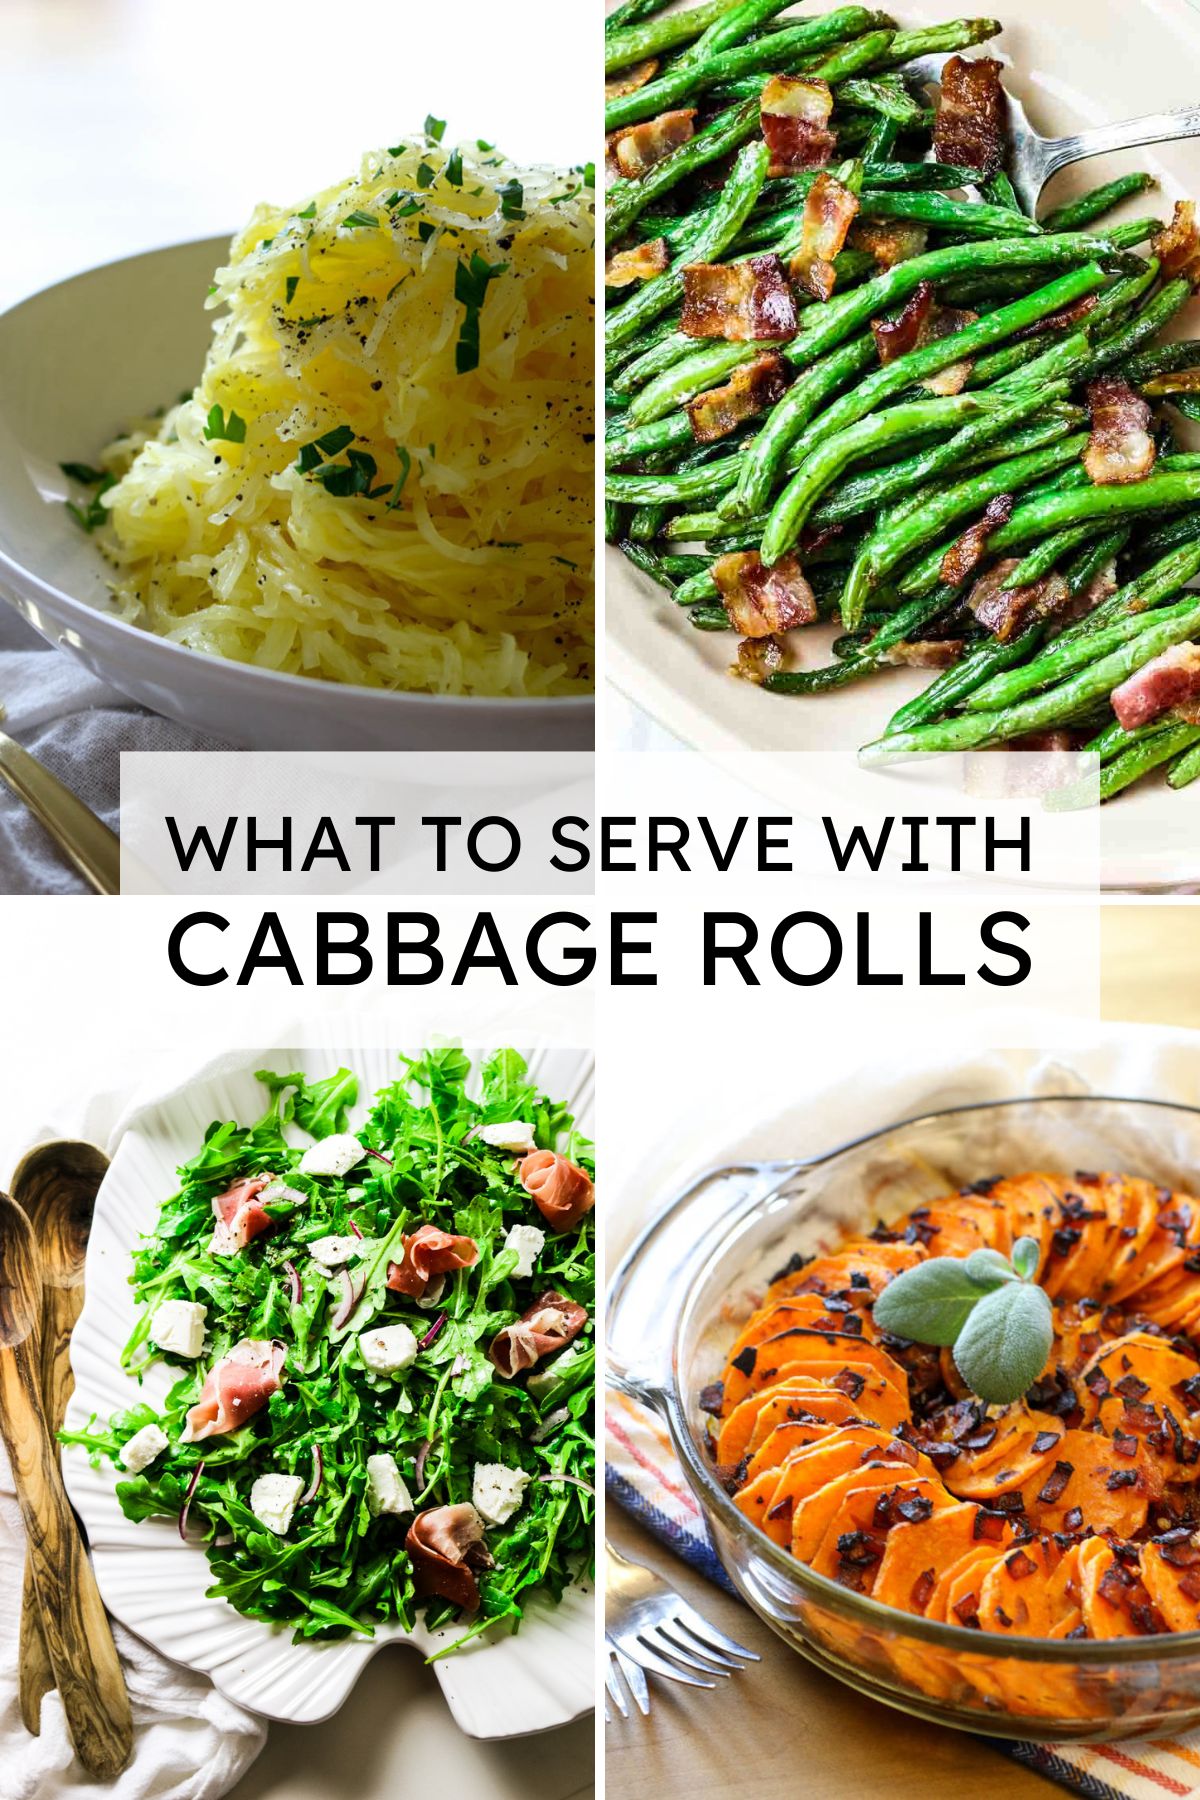 4-image collage that shows spaghetti squash, roasted green beans, arugula salad, and scalloped sweet potatoes, with text overlay.